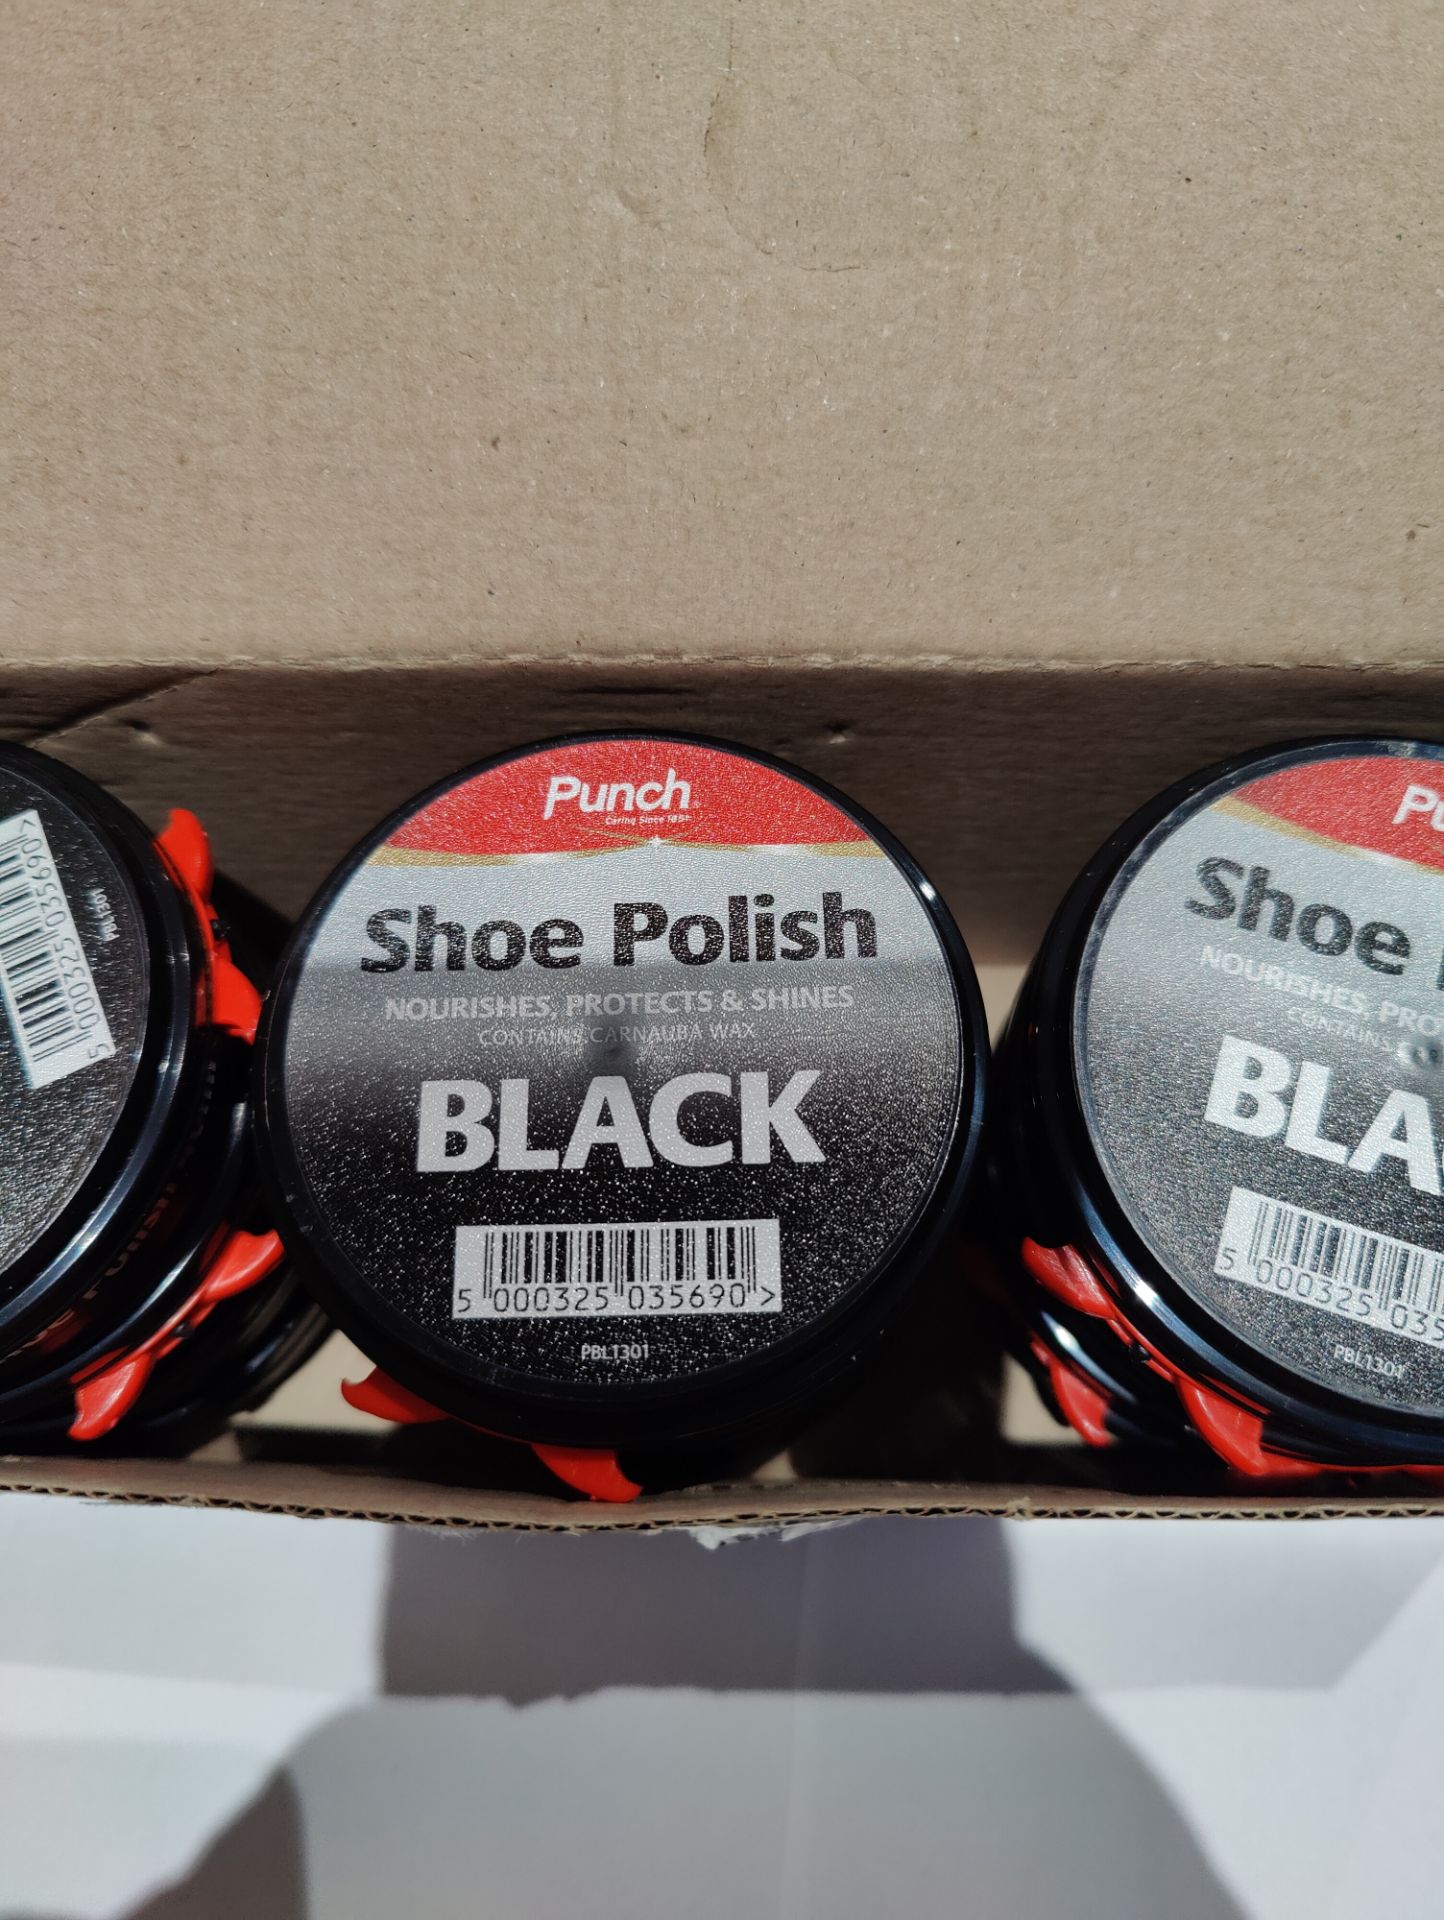 Clearance Joblot Box of 24 Punch Shoe Polish Black, Brown and 6 Scuff - Image 5 of 5